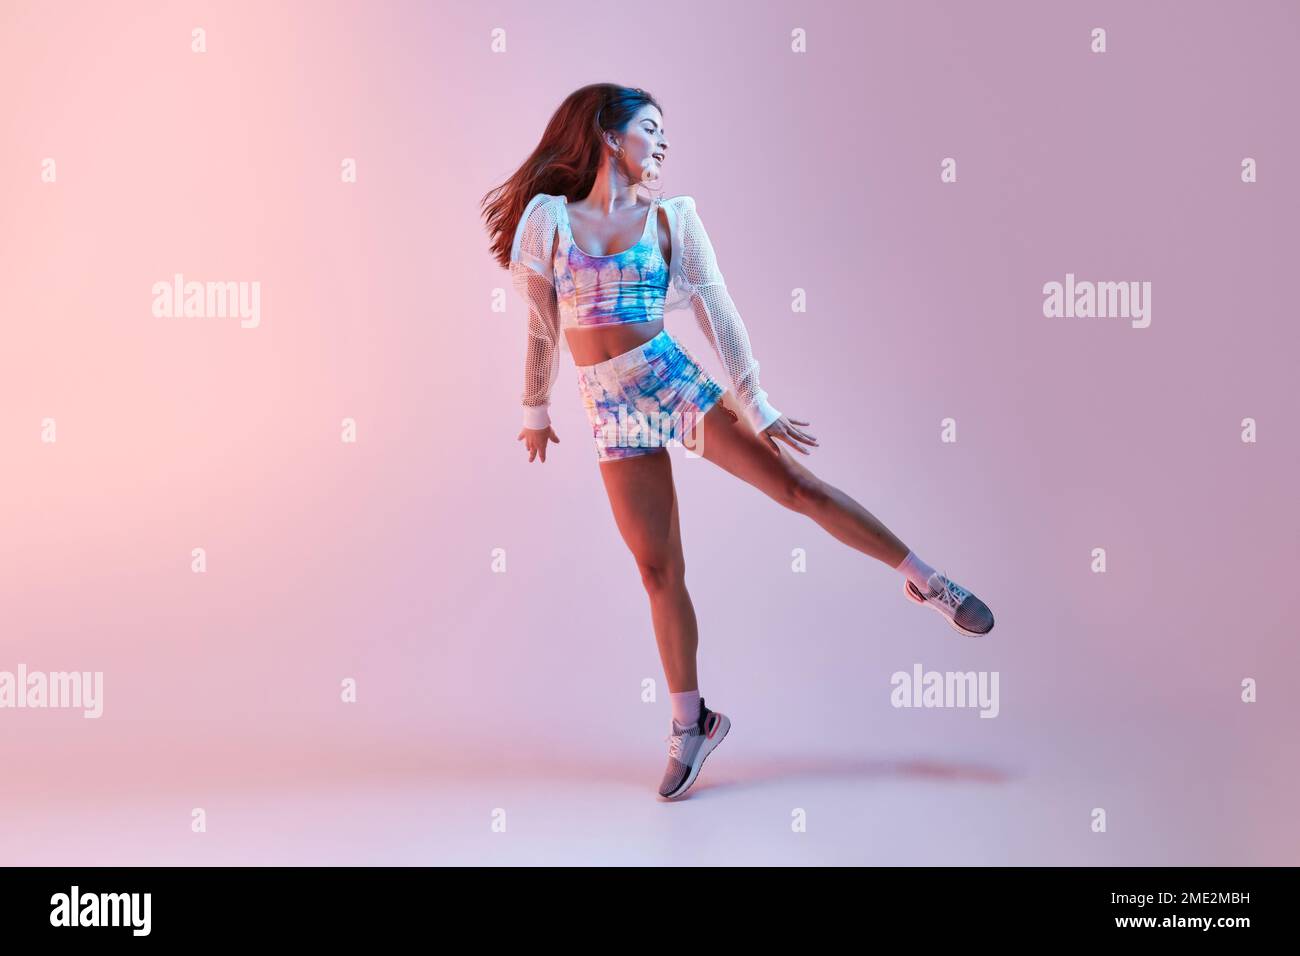 Young slim female in tight sportswear raising leg while dancing against pink background in studio Stock Photo